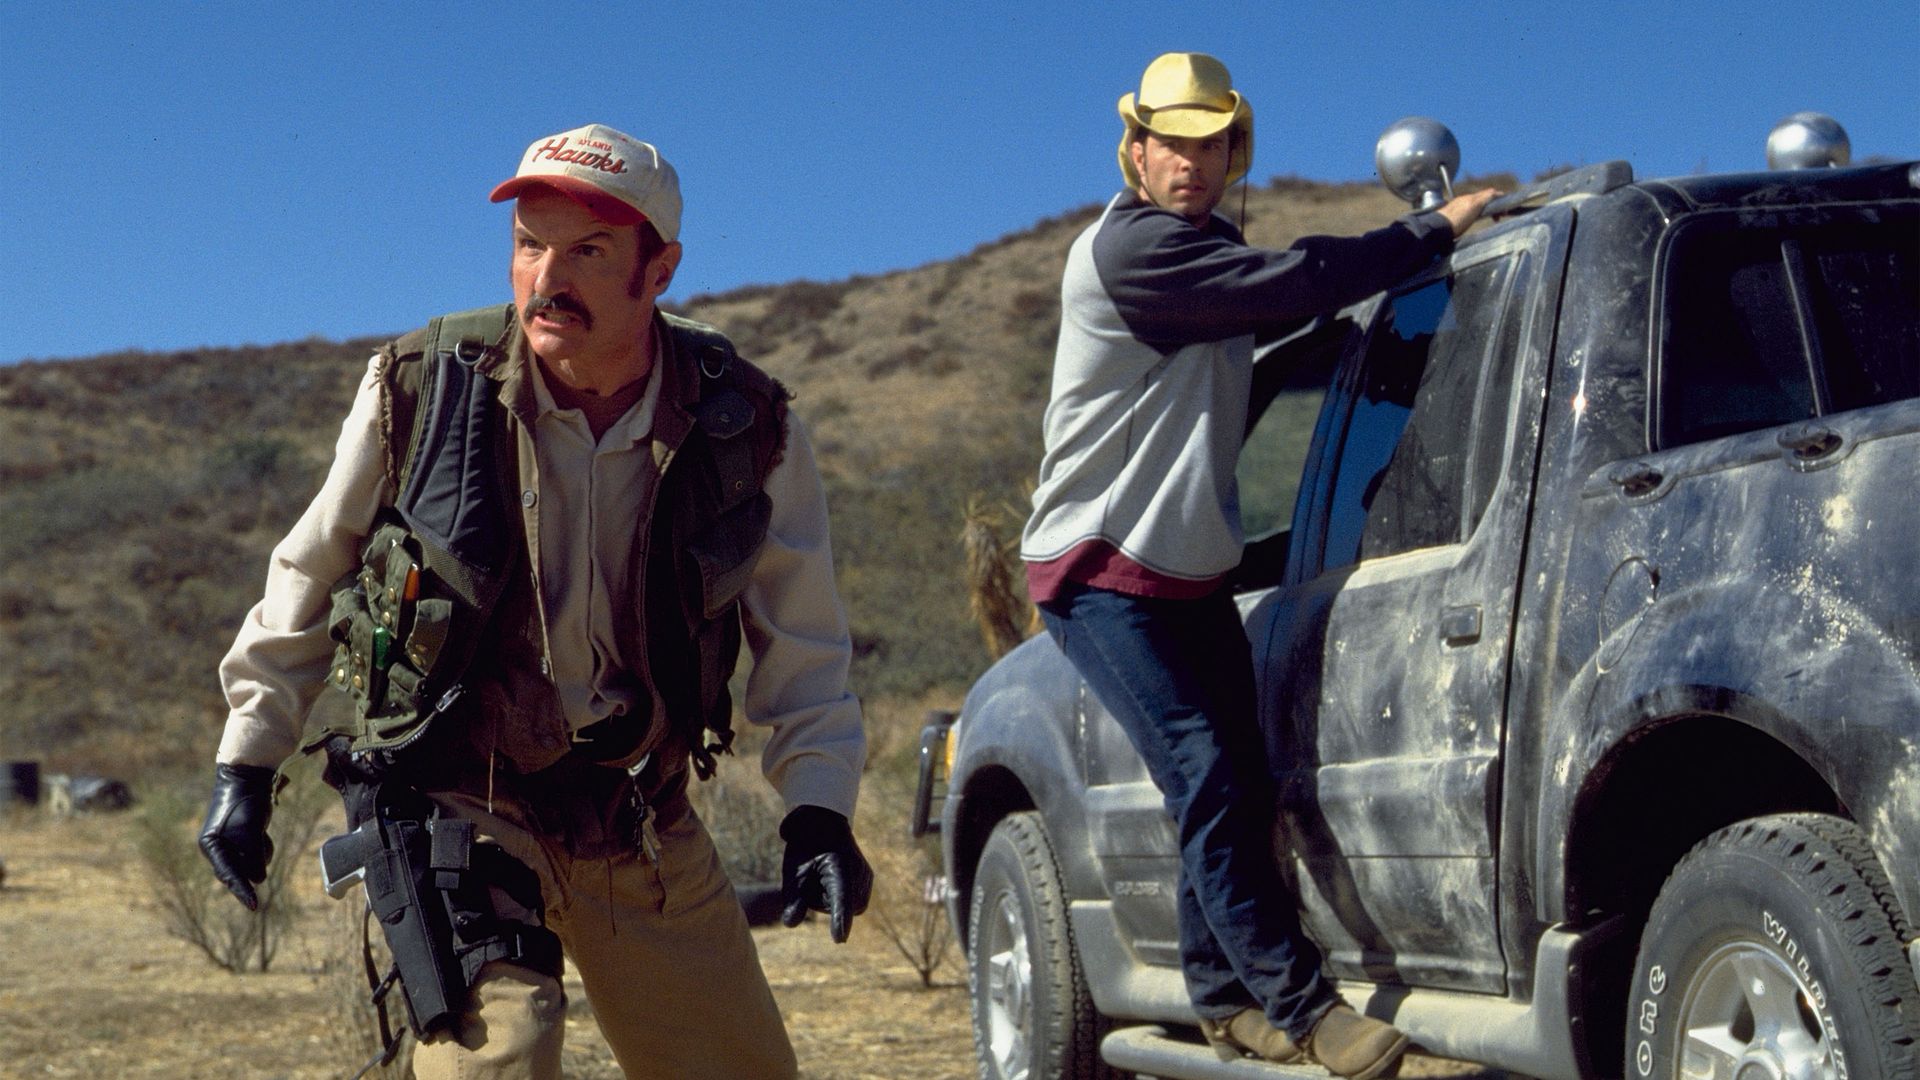 Tremors 3: Back to Perfection Backdrop